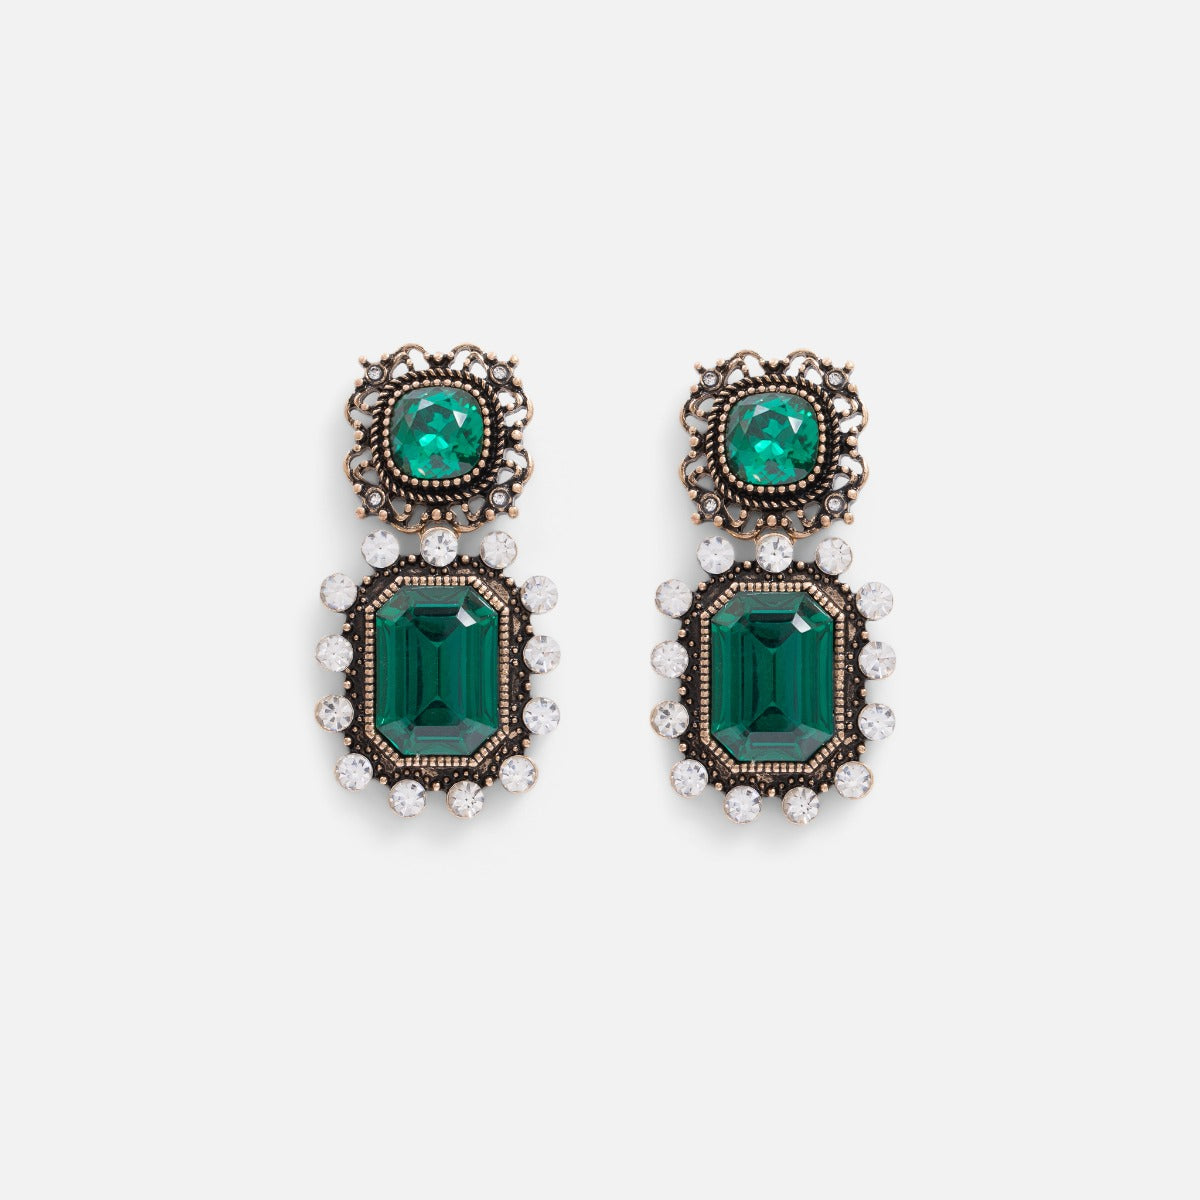 Emerald earrings and glittering stone pendent